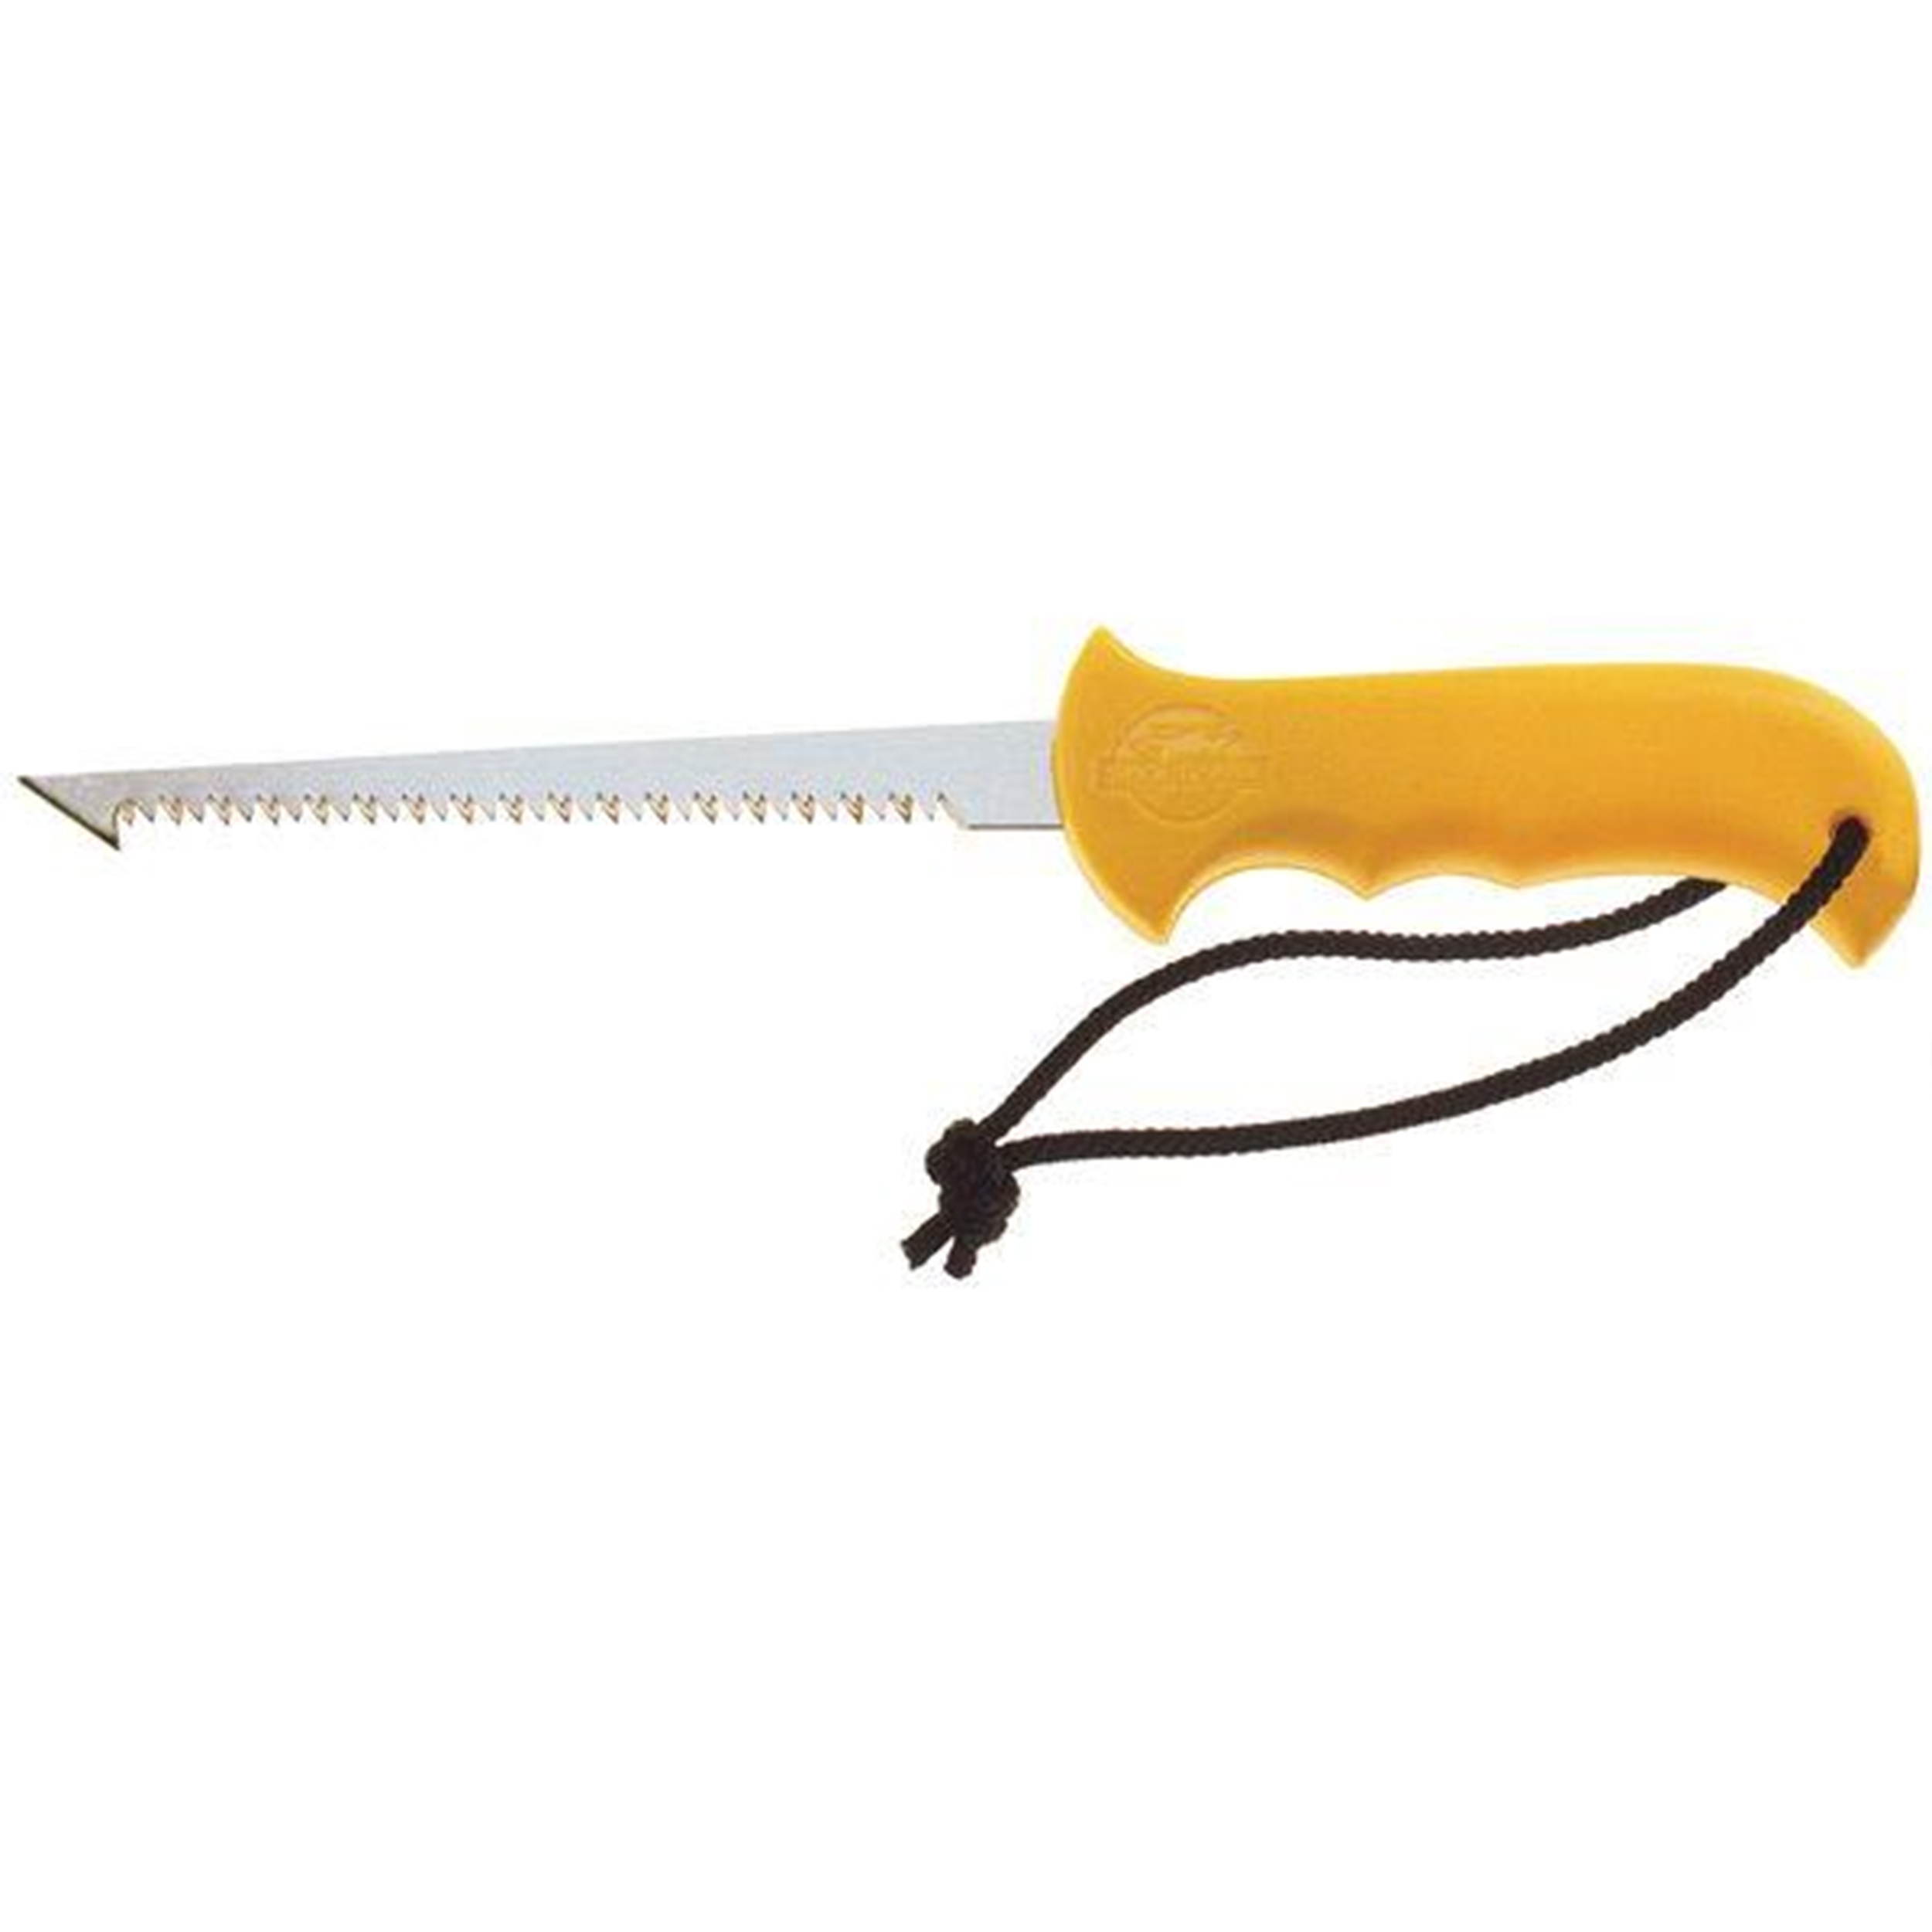 6" Rootcutter Saw, 10-5206